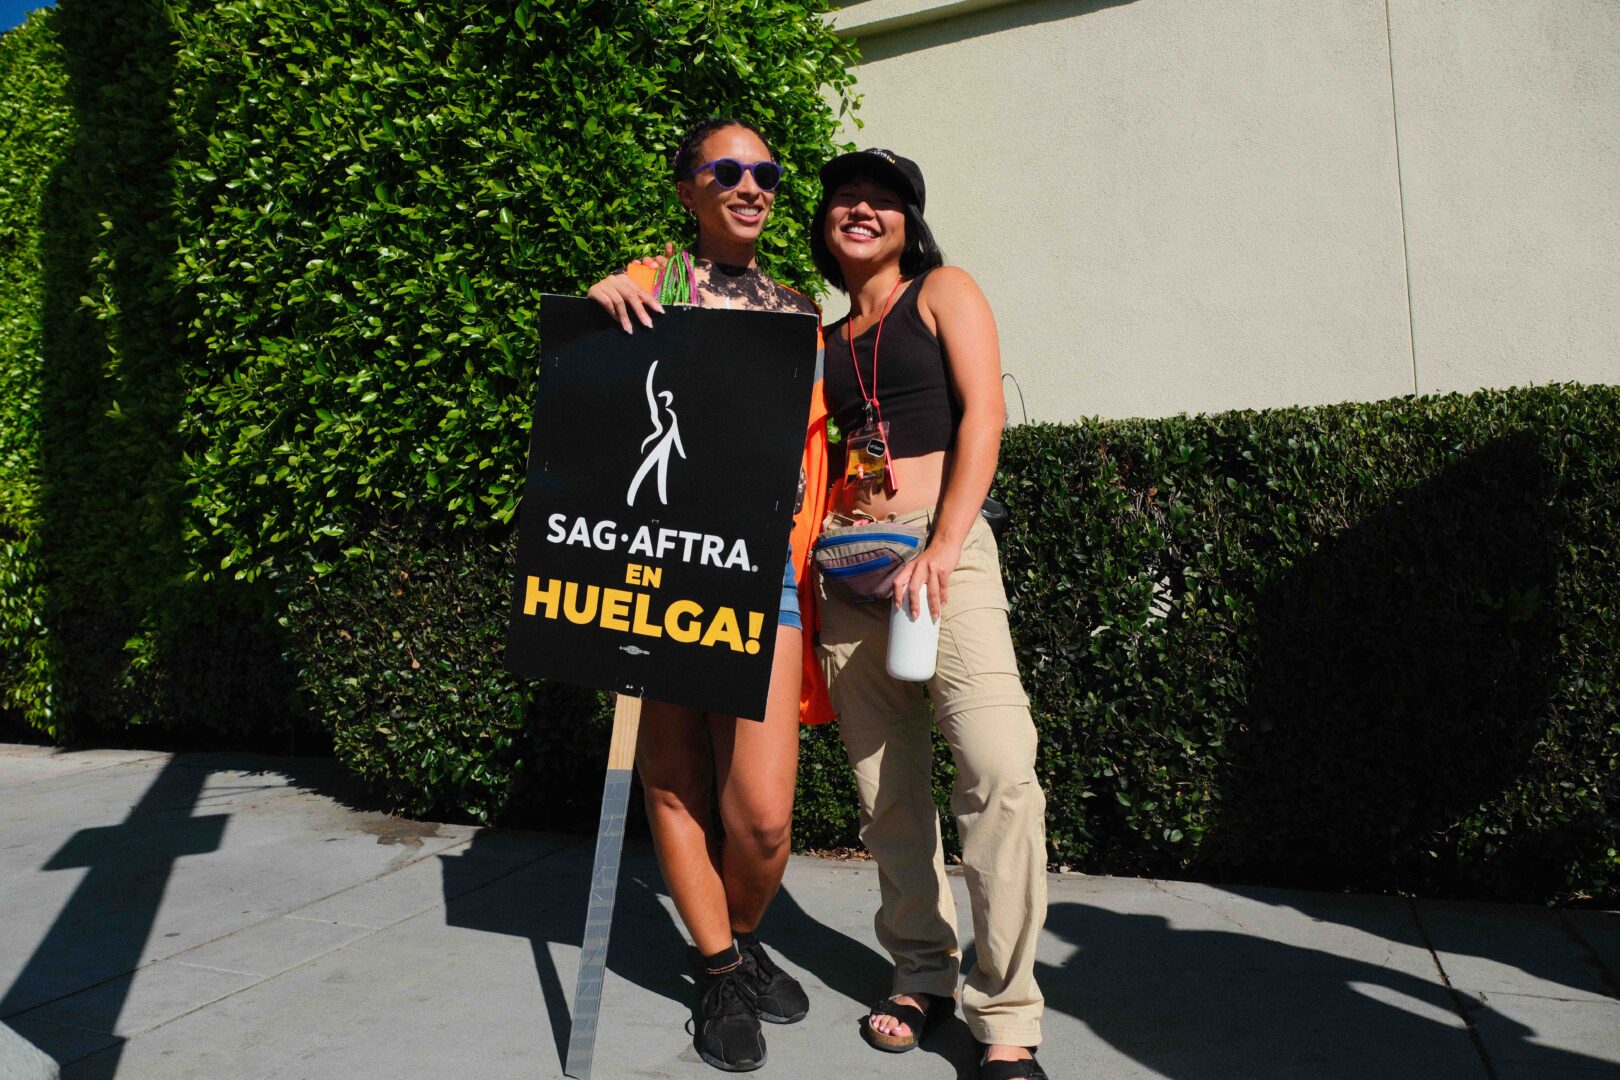 Two SAG-AFTRA members smiling and holding a sign in front of them that reads SAG-AFTRA EN HUELGA!